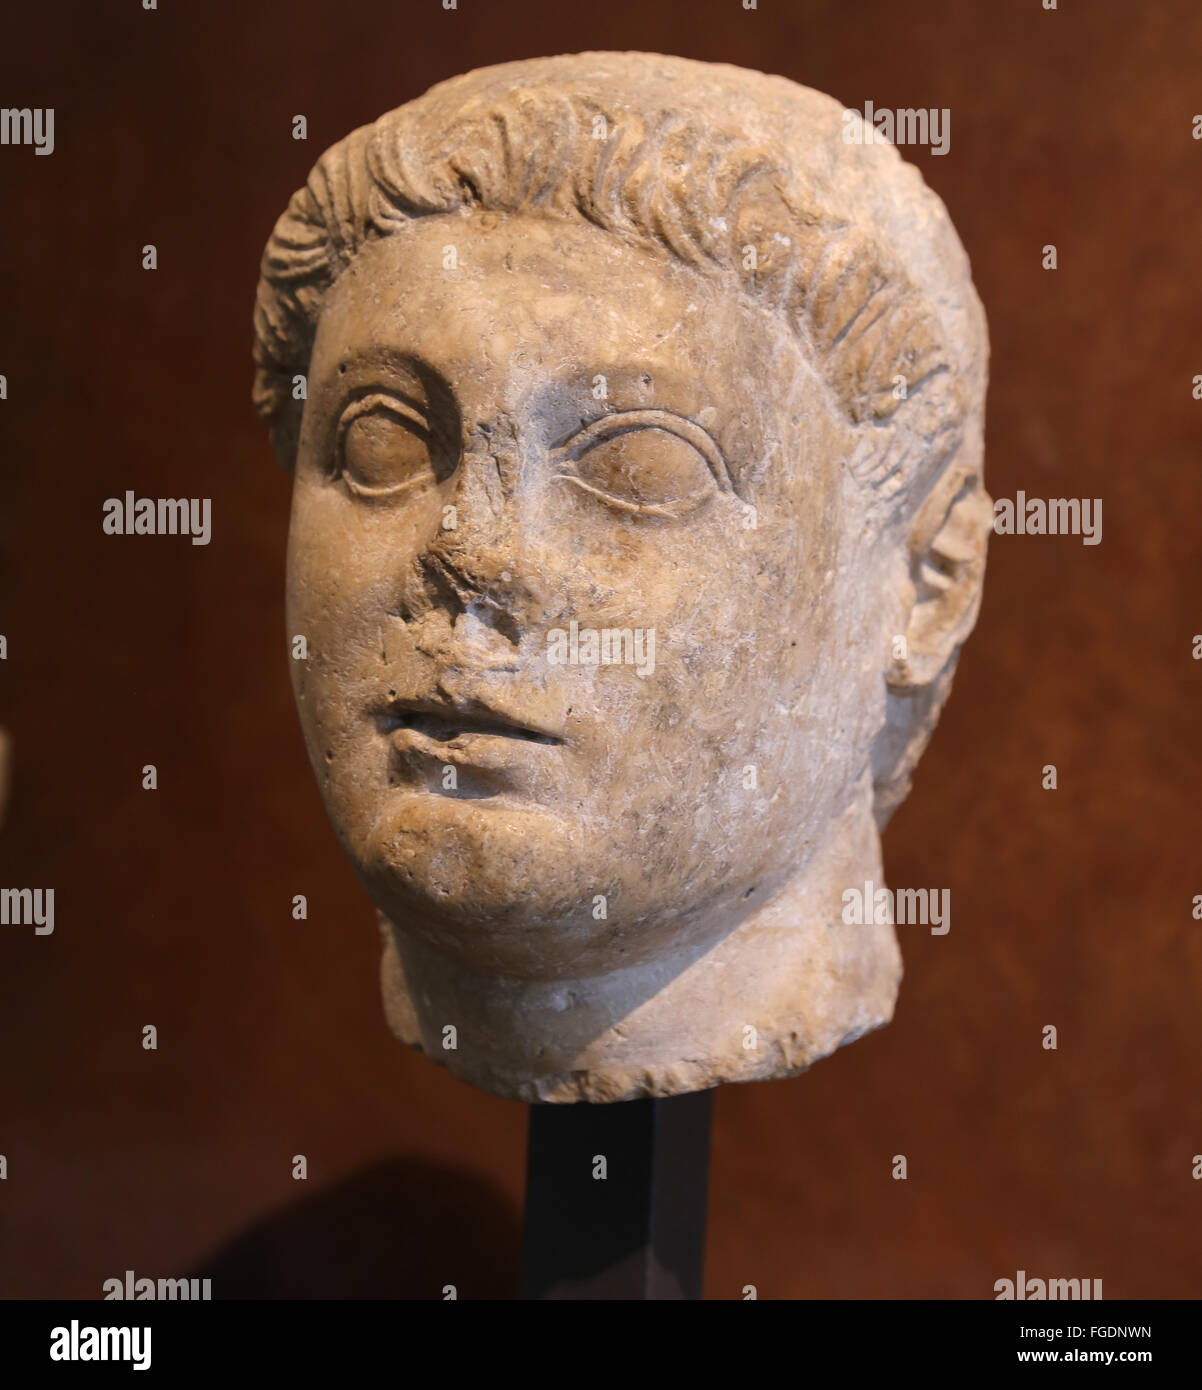 Ptolemy II Philadelphus (309-246 BC). King of Ptolemaic Egypt from 283-246 BC. Royal bust from Greek Egypt. 2nd-1st century BC. Stock Photo